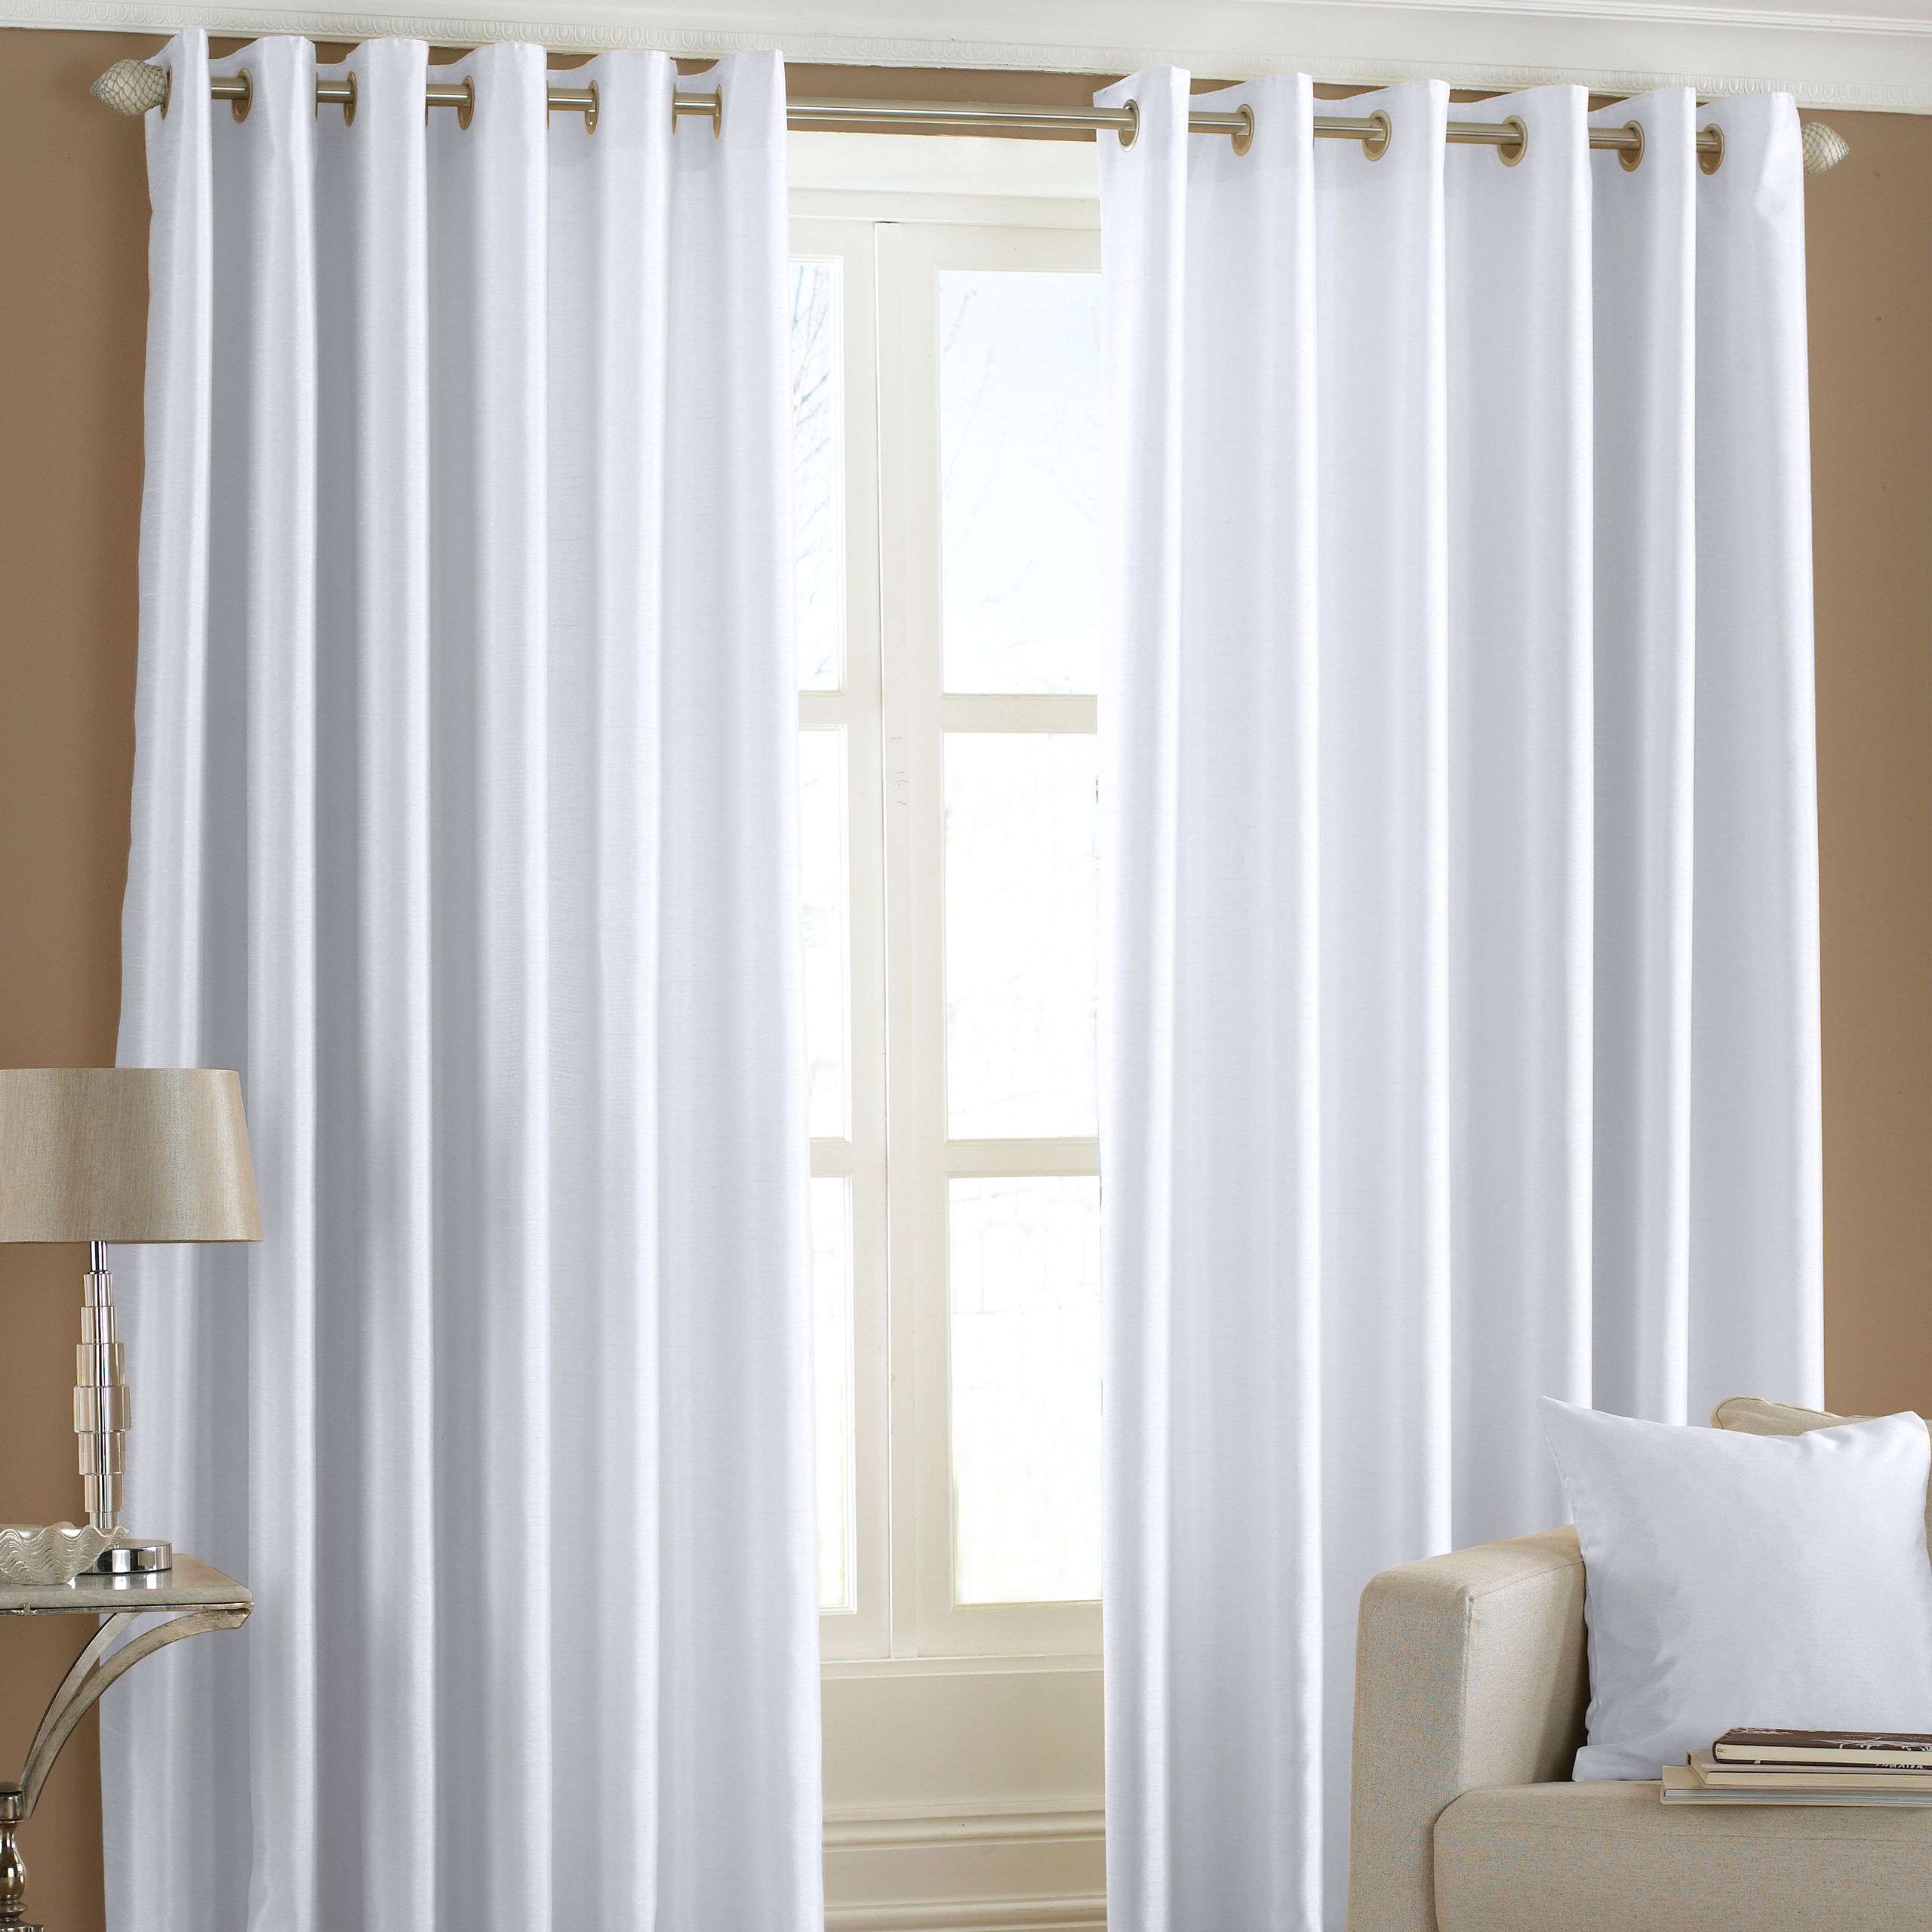 The Fiji curtains embody all the bright colours you’d find on a tropical island – from the vibrant pinks of the flowers to the deep blues of the sea. The luxurious faux silk fabric reflect light at all angles while being soft to the touch. These iridescent eyelet curtains are easy to hang with no need for hooks or rings and are made of semi-sheer material to allow just the right amount of light through. Made of 100% polyester these lustrous curtains are made of hard-wearing polyester and are fully machine washable.